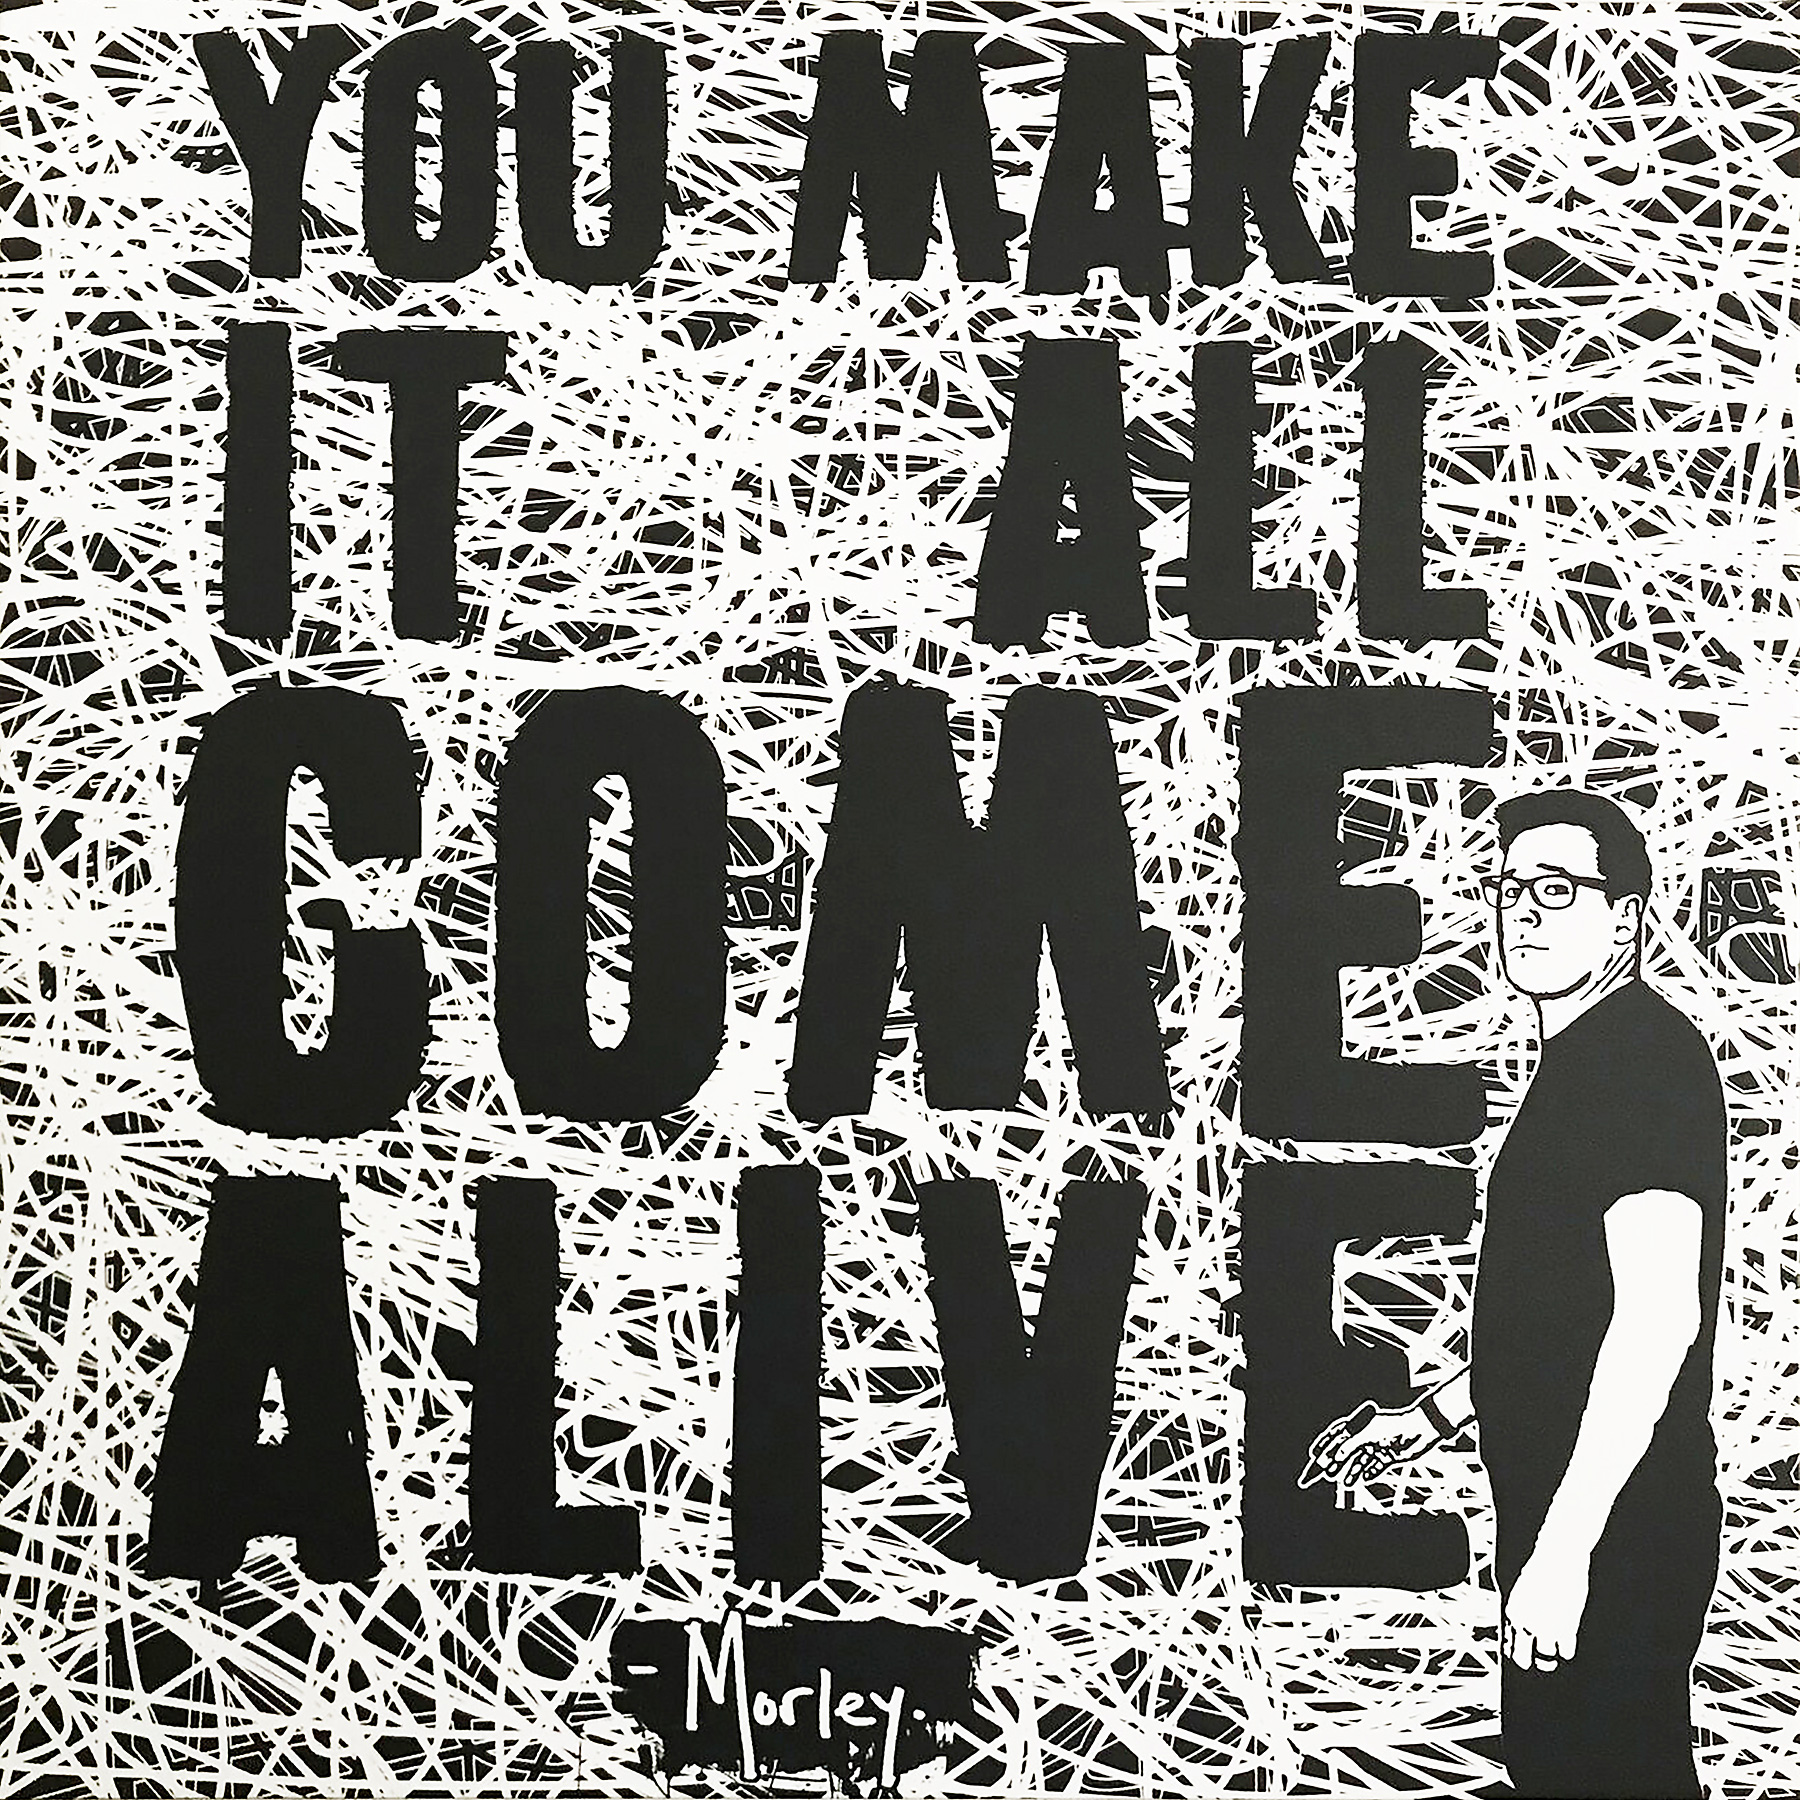 'Come Alive' by street artist Morley